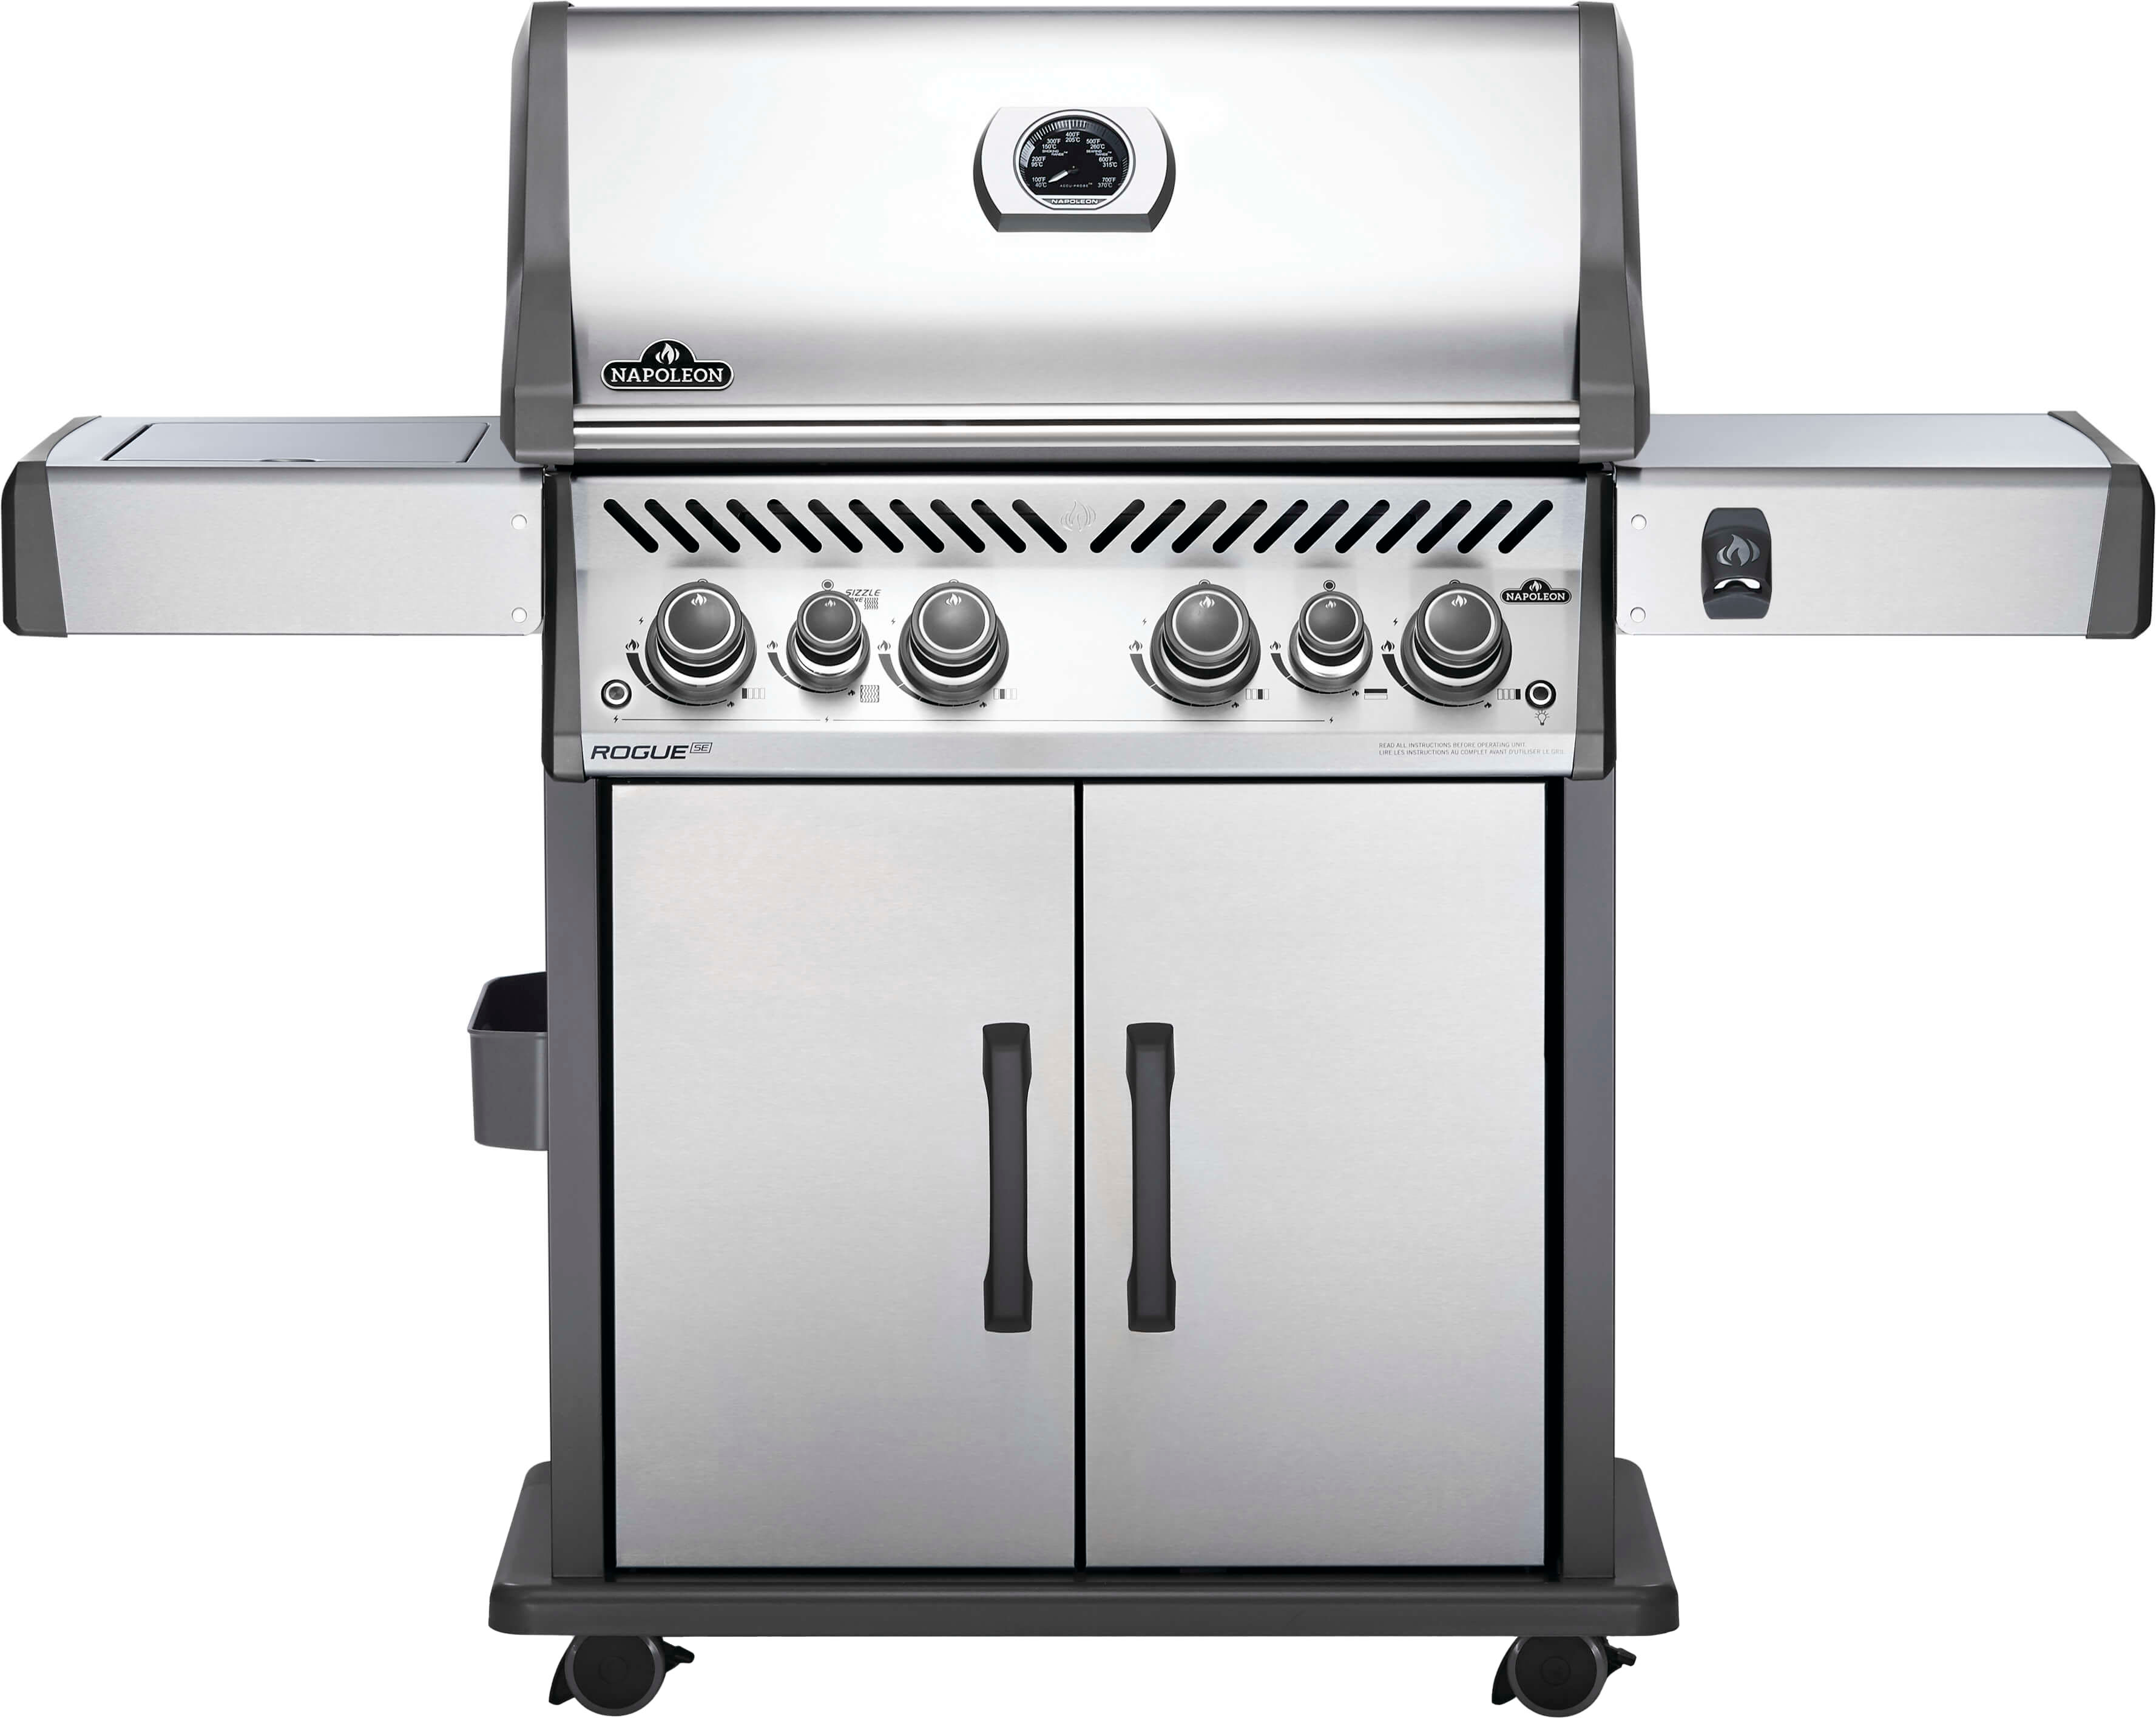 0629162146298 - NAPOLEON - ROGUE SE 525 PROPANE GAS GRILL WITH INFRARED REAR AND SIDE BURNERS AND BONUS COVER, STAINLESS STEEL - STAINLESS STEEL